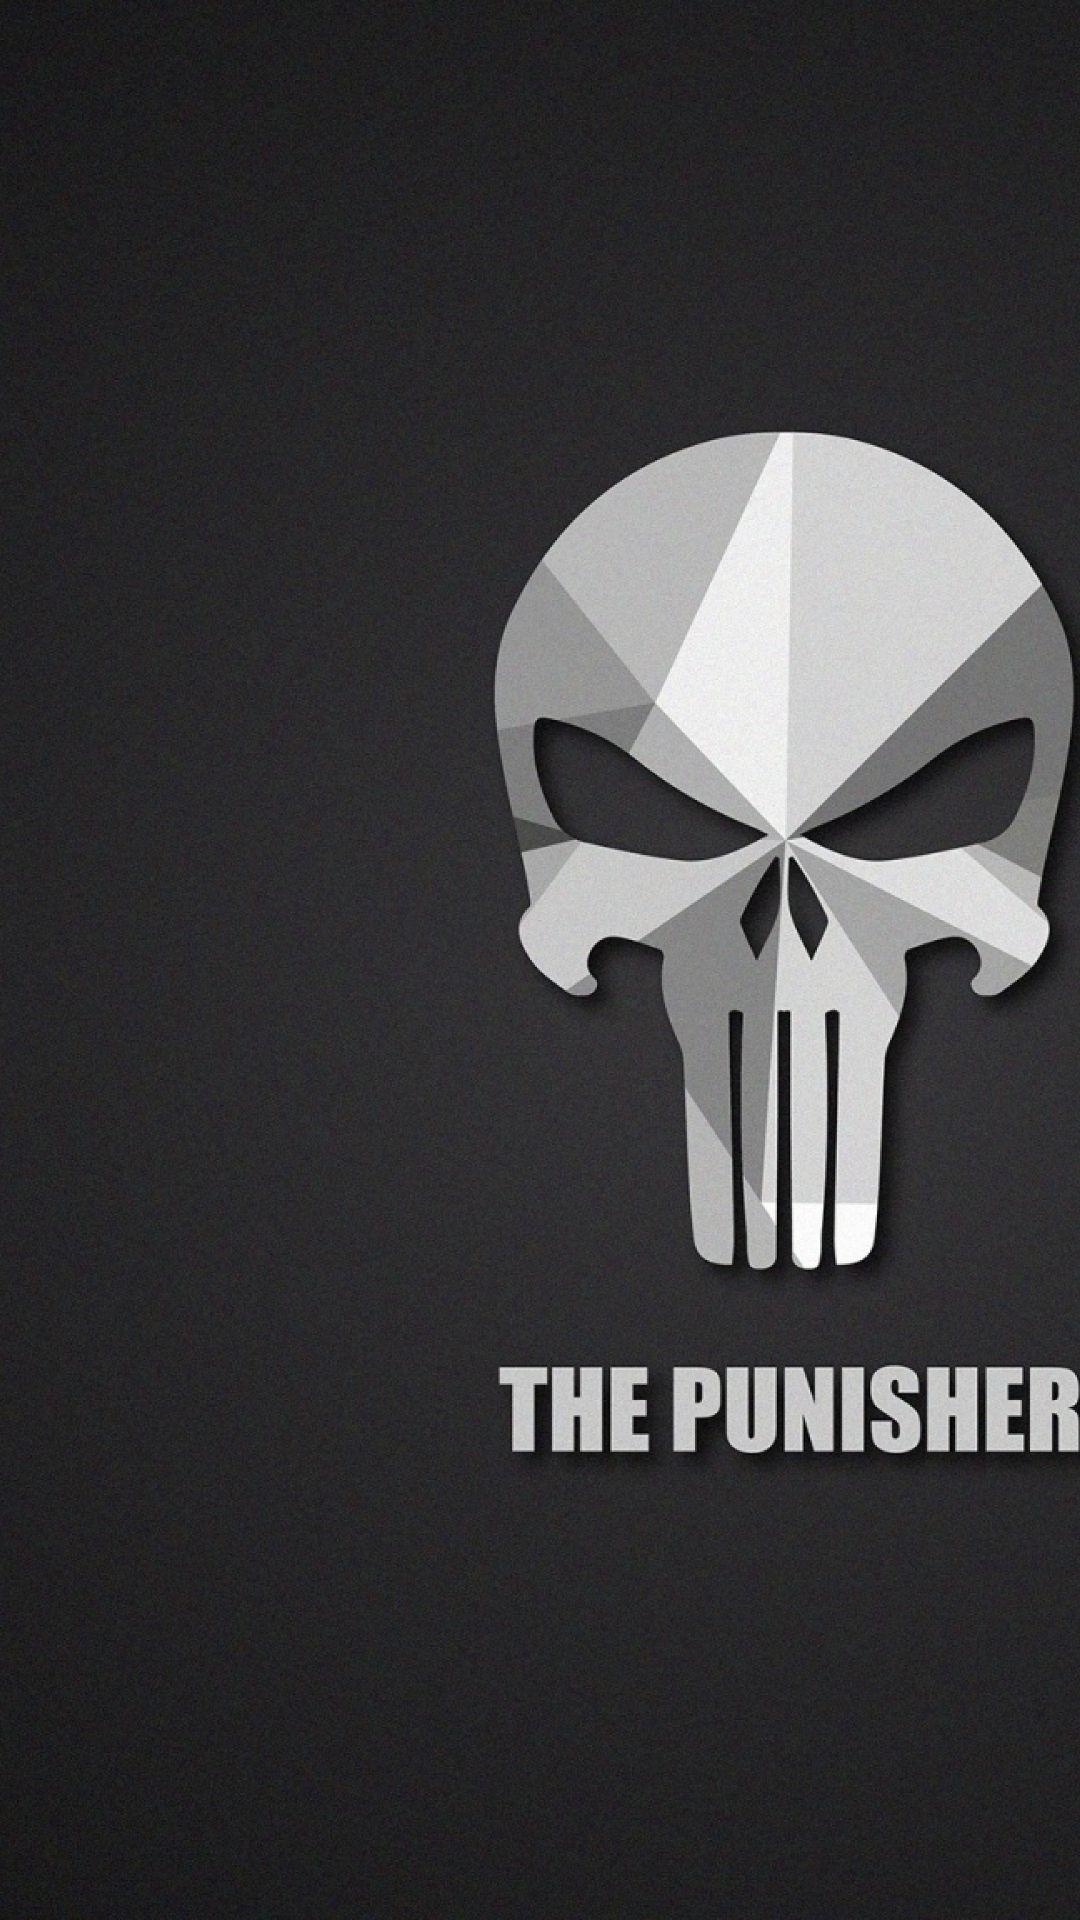 Download The Punisher Material Logo 1080x1920 Resolution, Full HD 2K